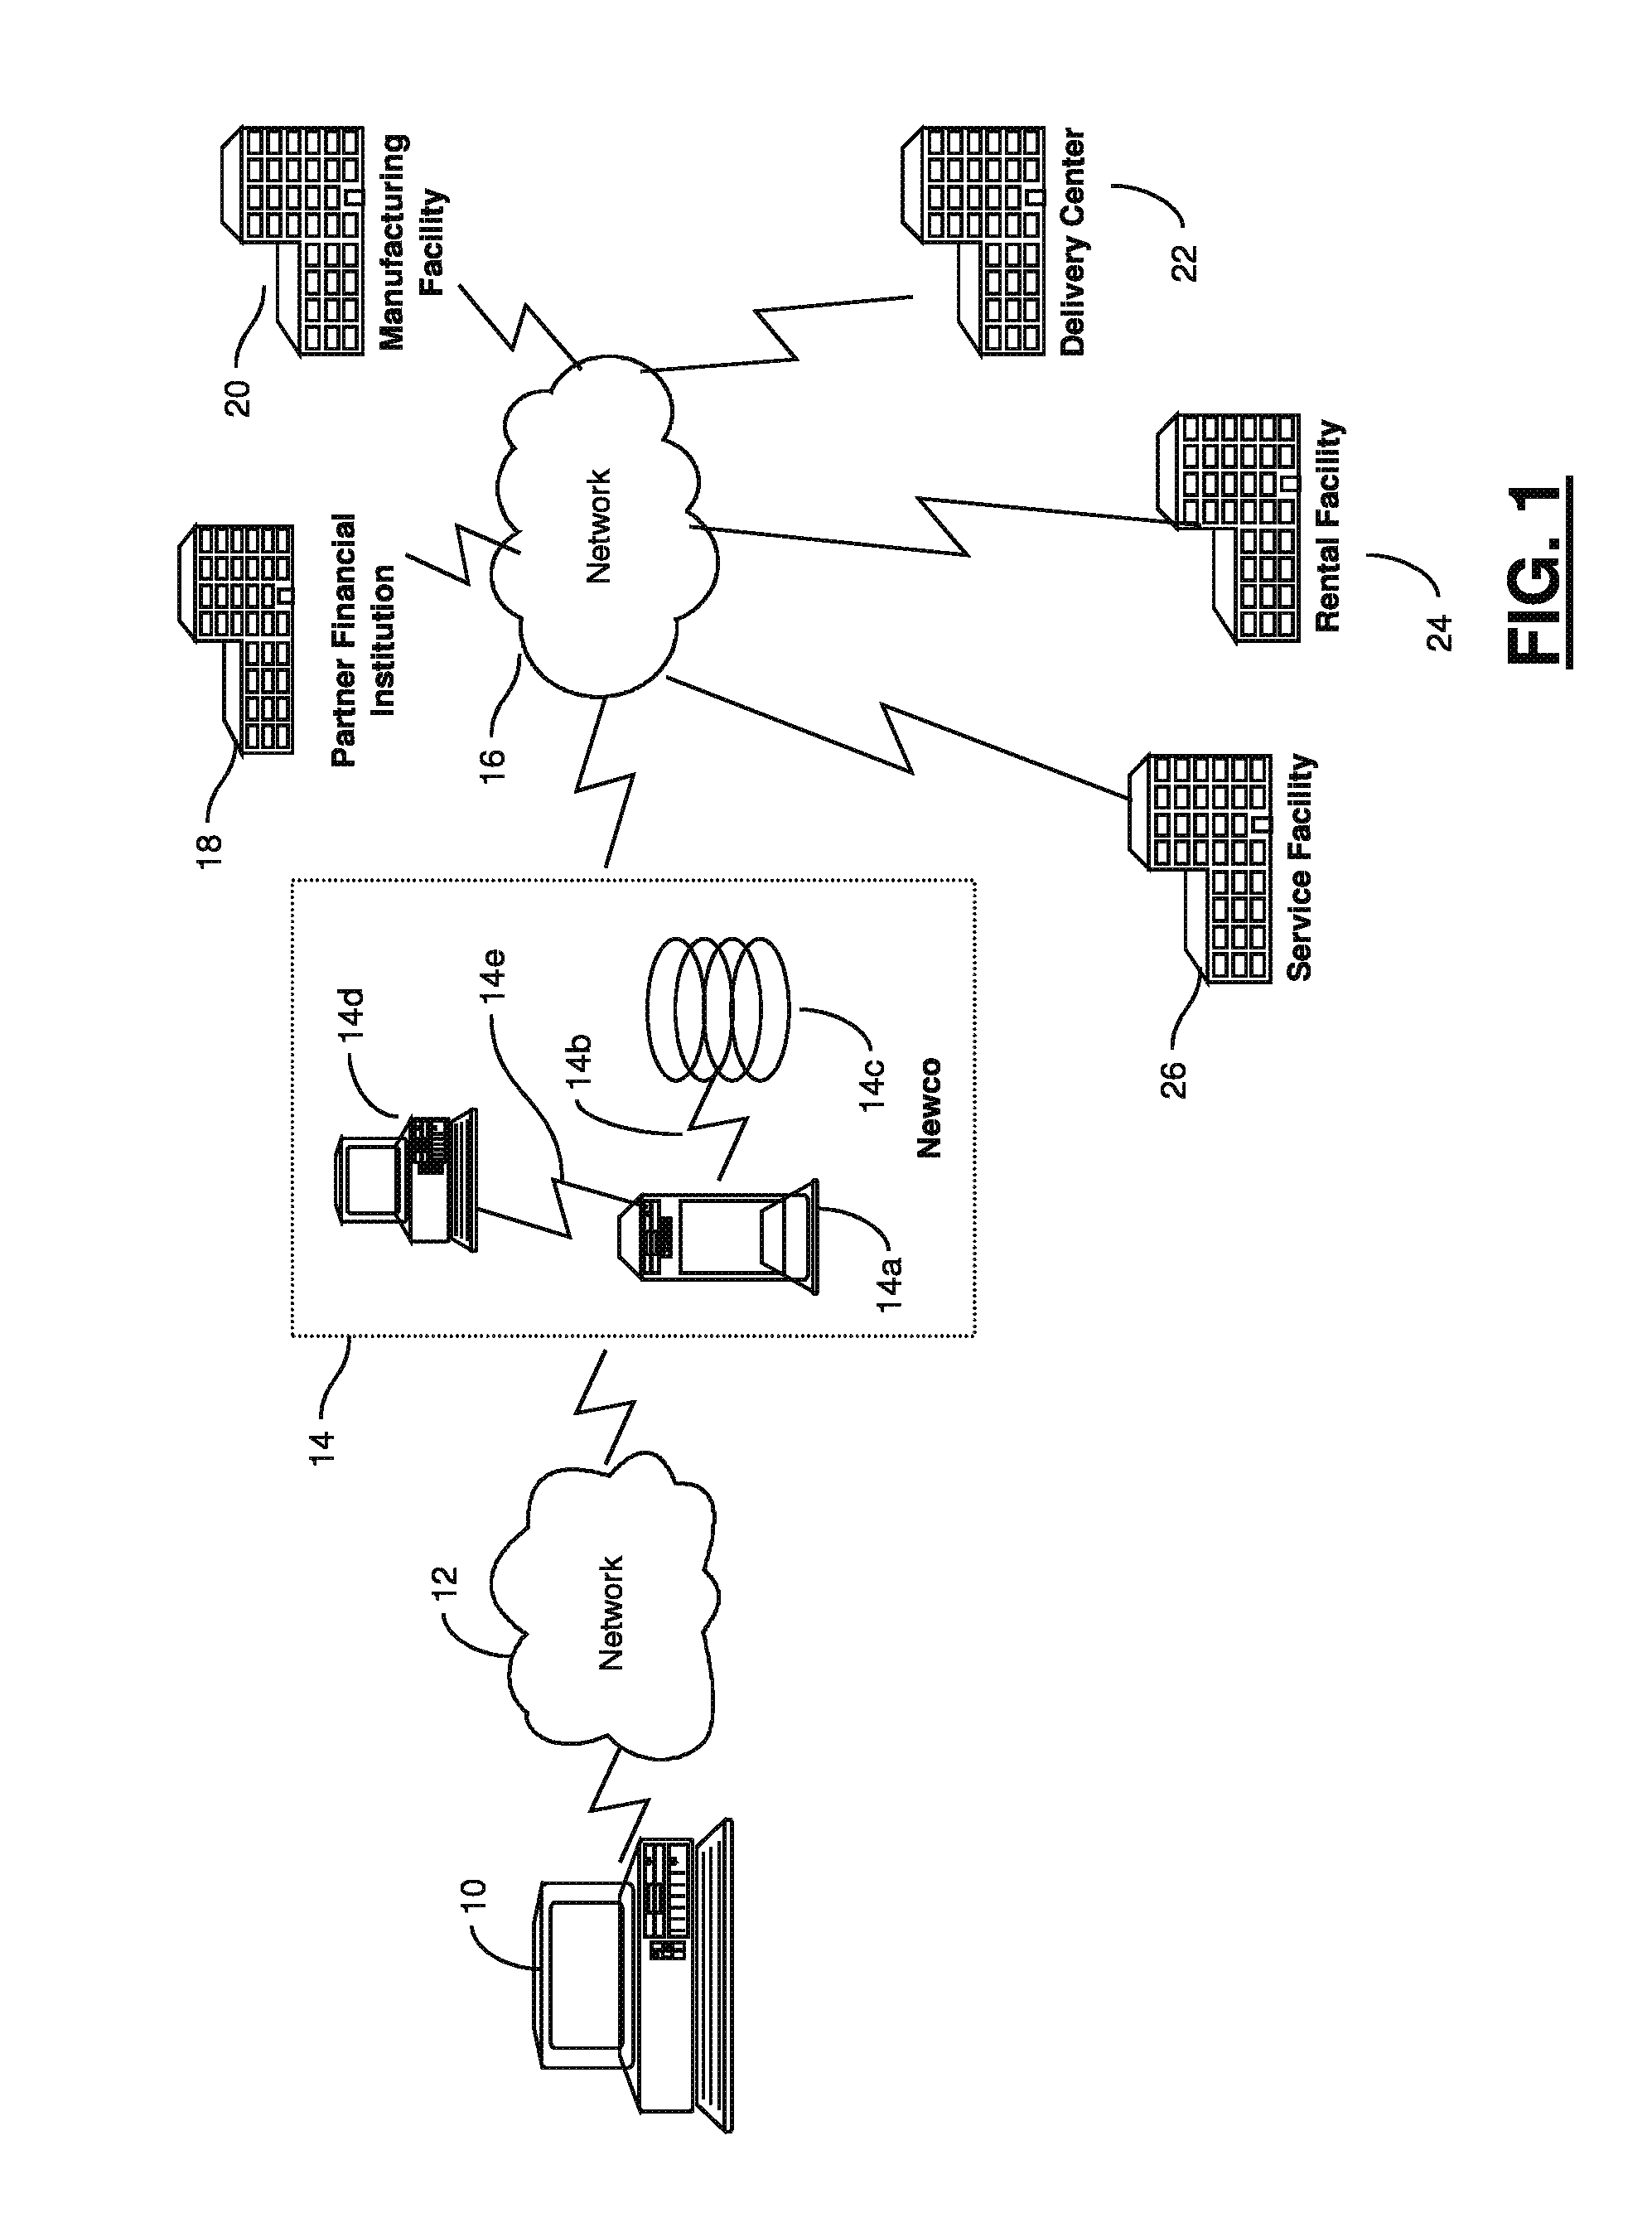 System and Method for Vehicle Retail Sales, Distribution, and Post-Sales Maintenance